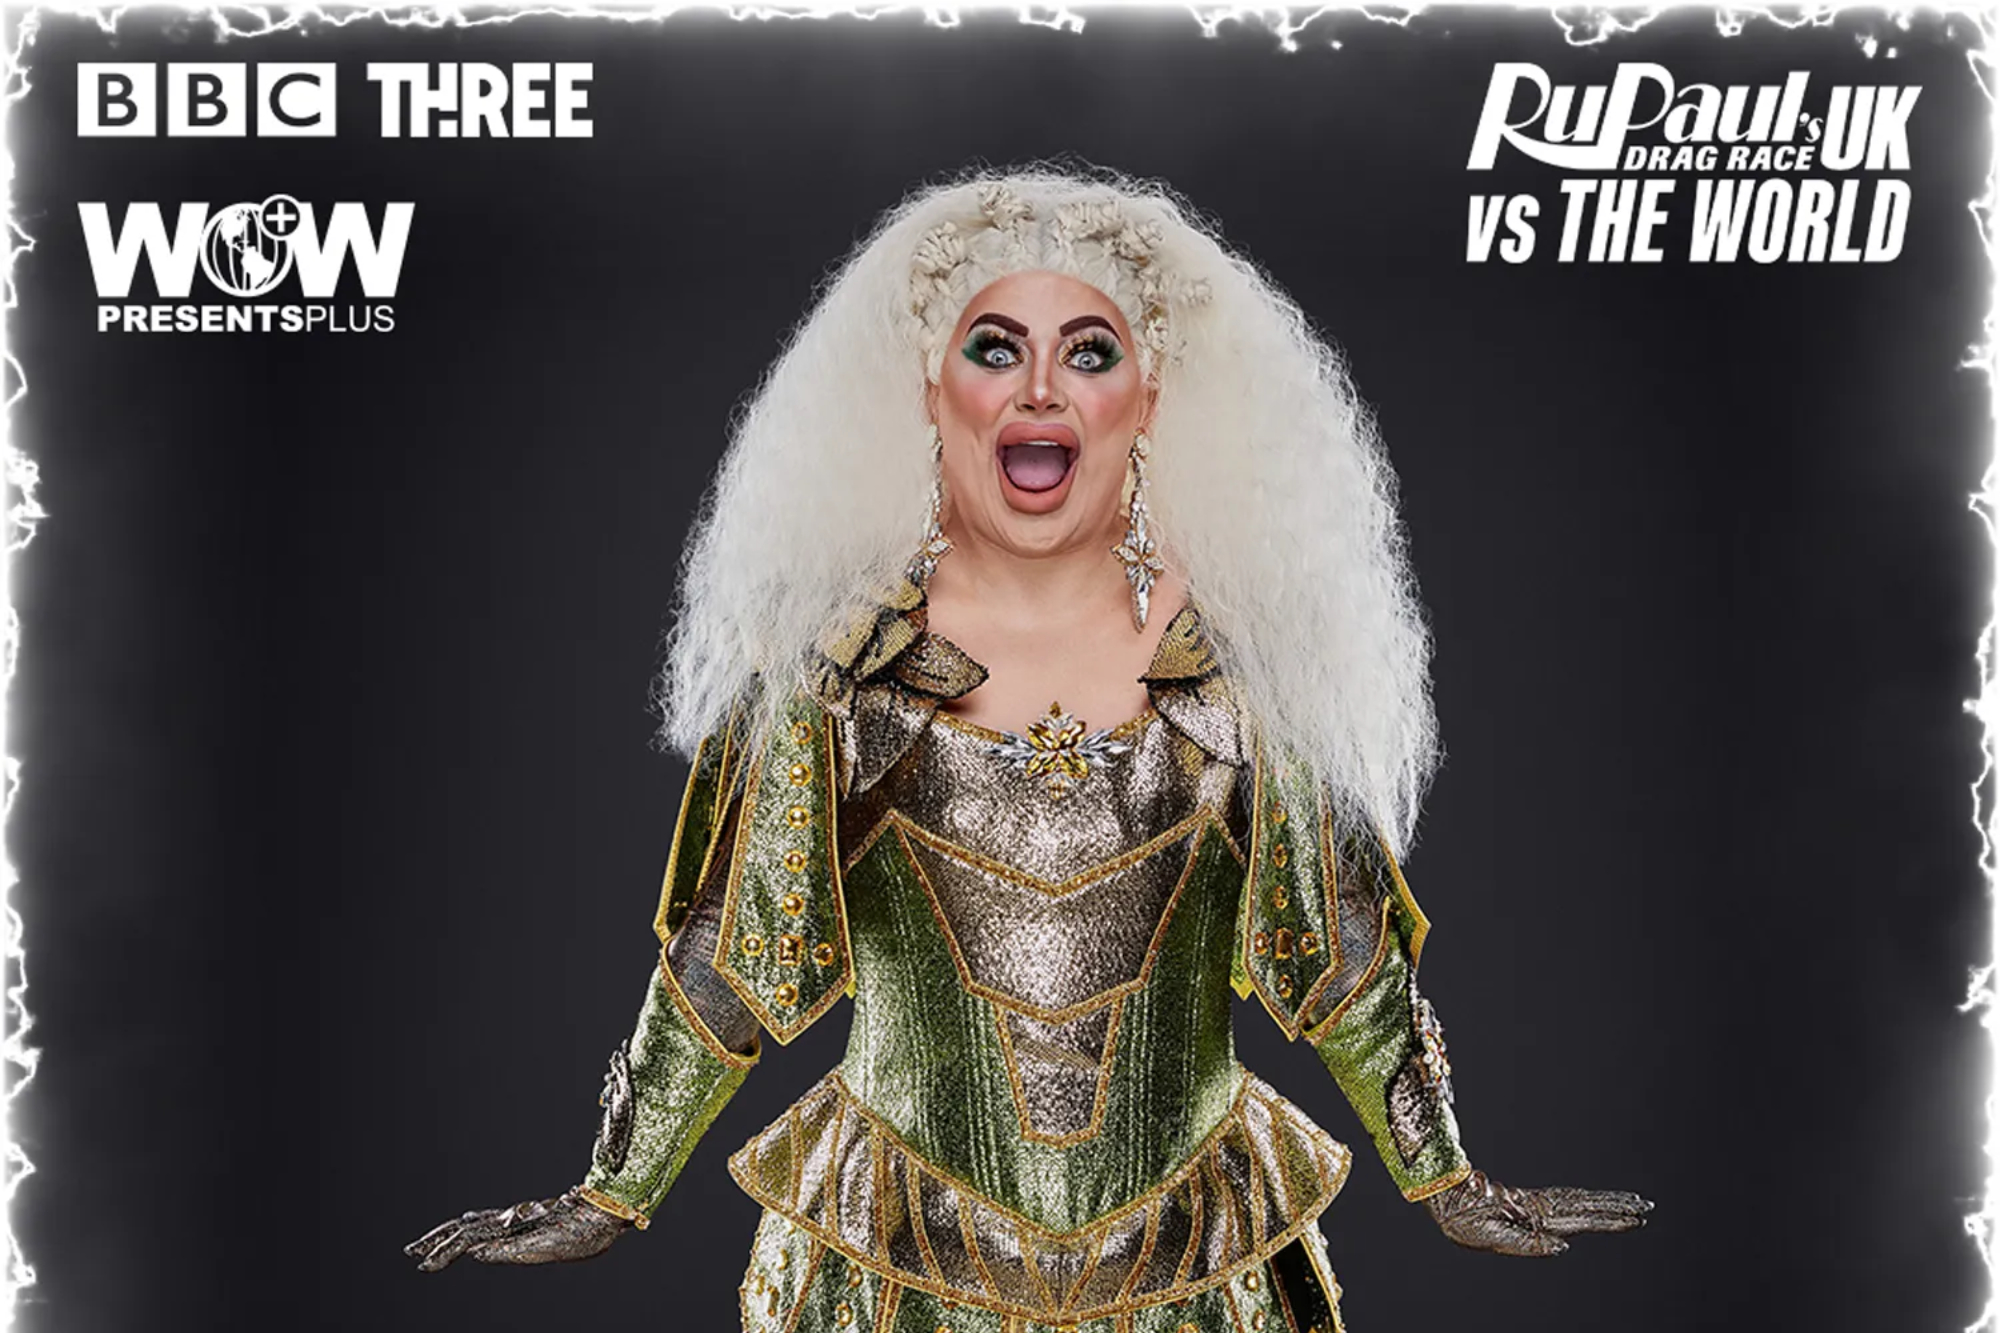 'RuPaul's Drag Race: UK vs the World' Baga Chipz in promo images with hands at her side